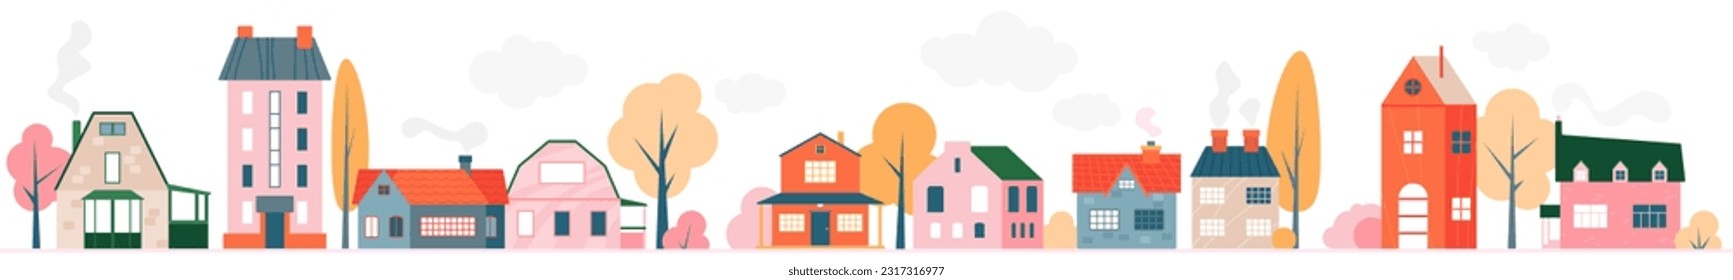 Cute cartooon charming small town village houses panorama. Front view of a variety of brick cottages and apartments vector illustration svg